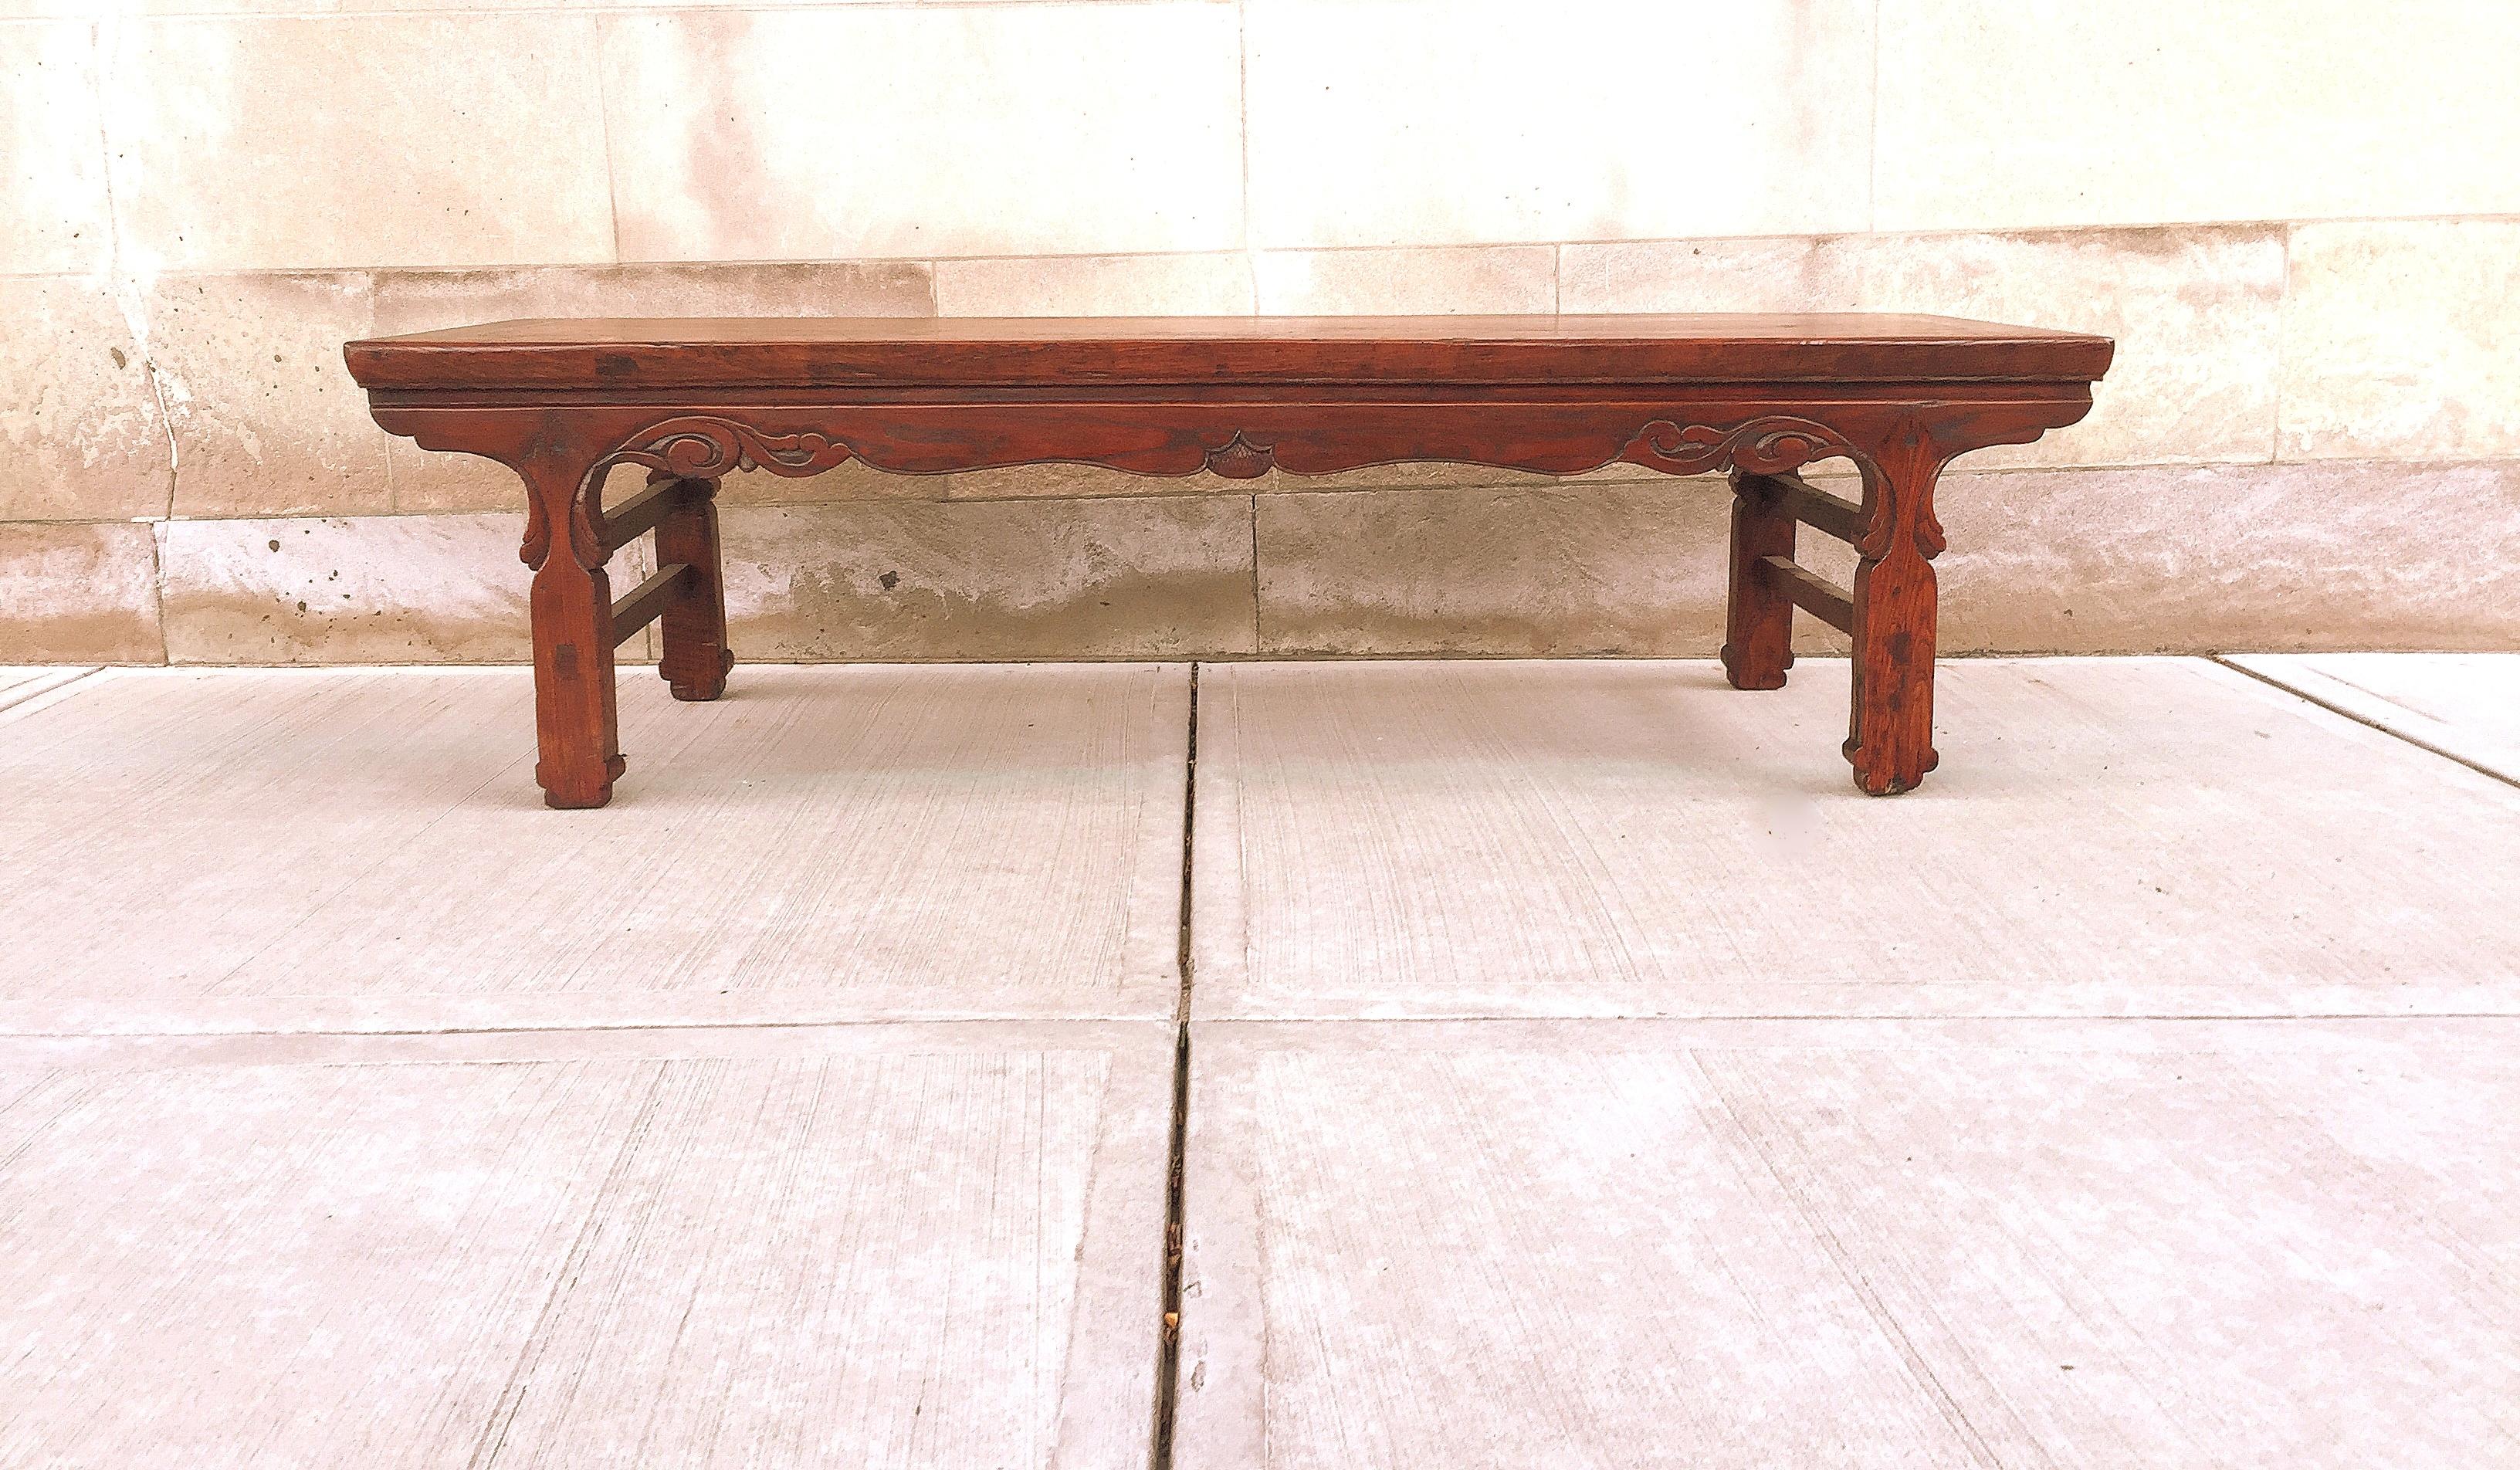 Jumu wood antiques Asian Kang low table, can be use large coffee table or side table or bench seating with relief carving on the aprons.
The table is very sturdy and can be use for seating and coffee table and use other functions.